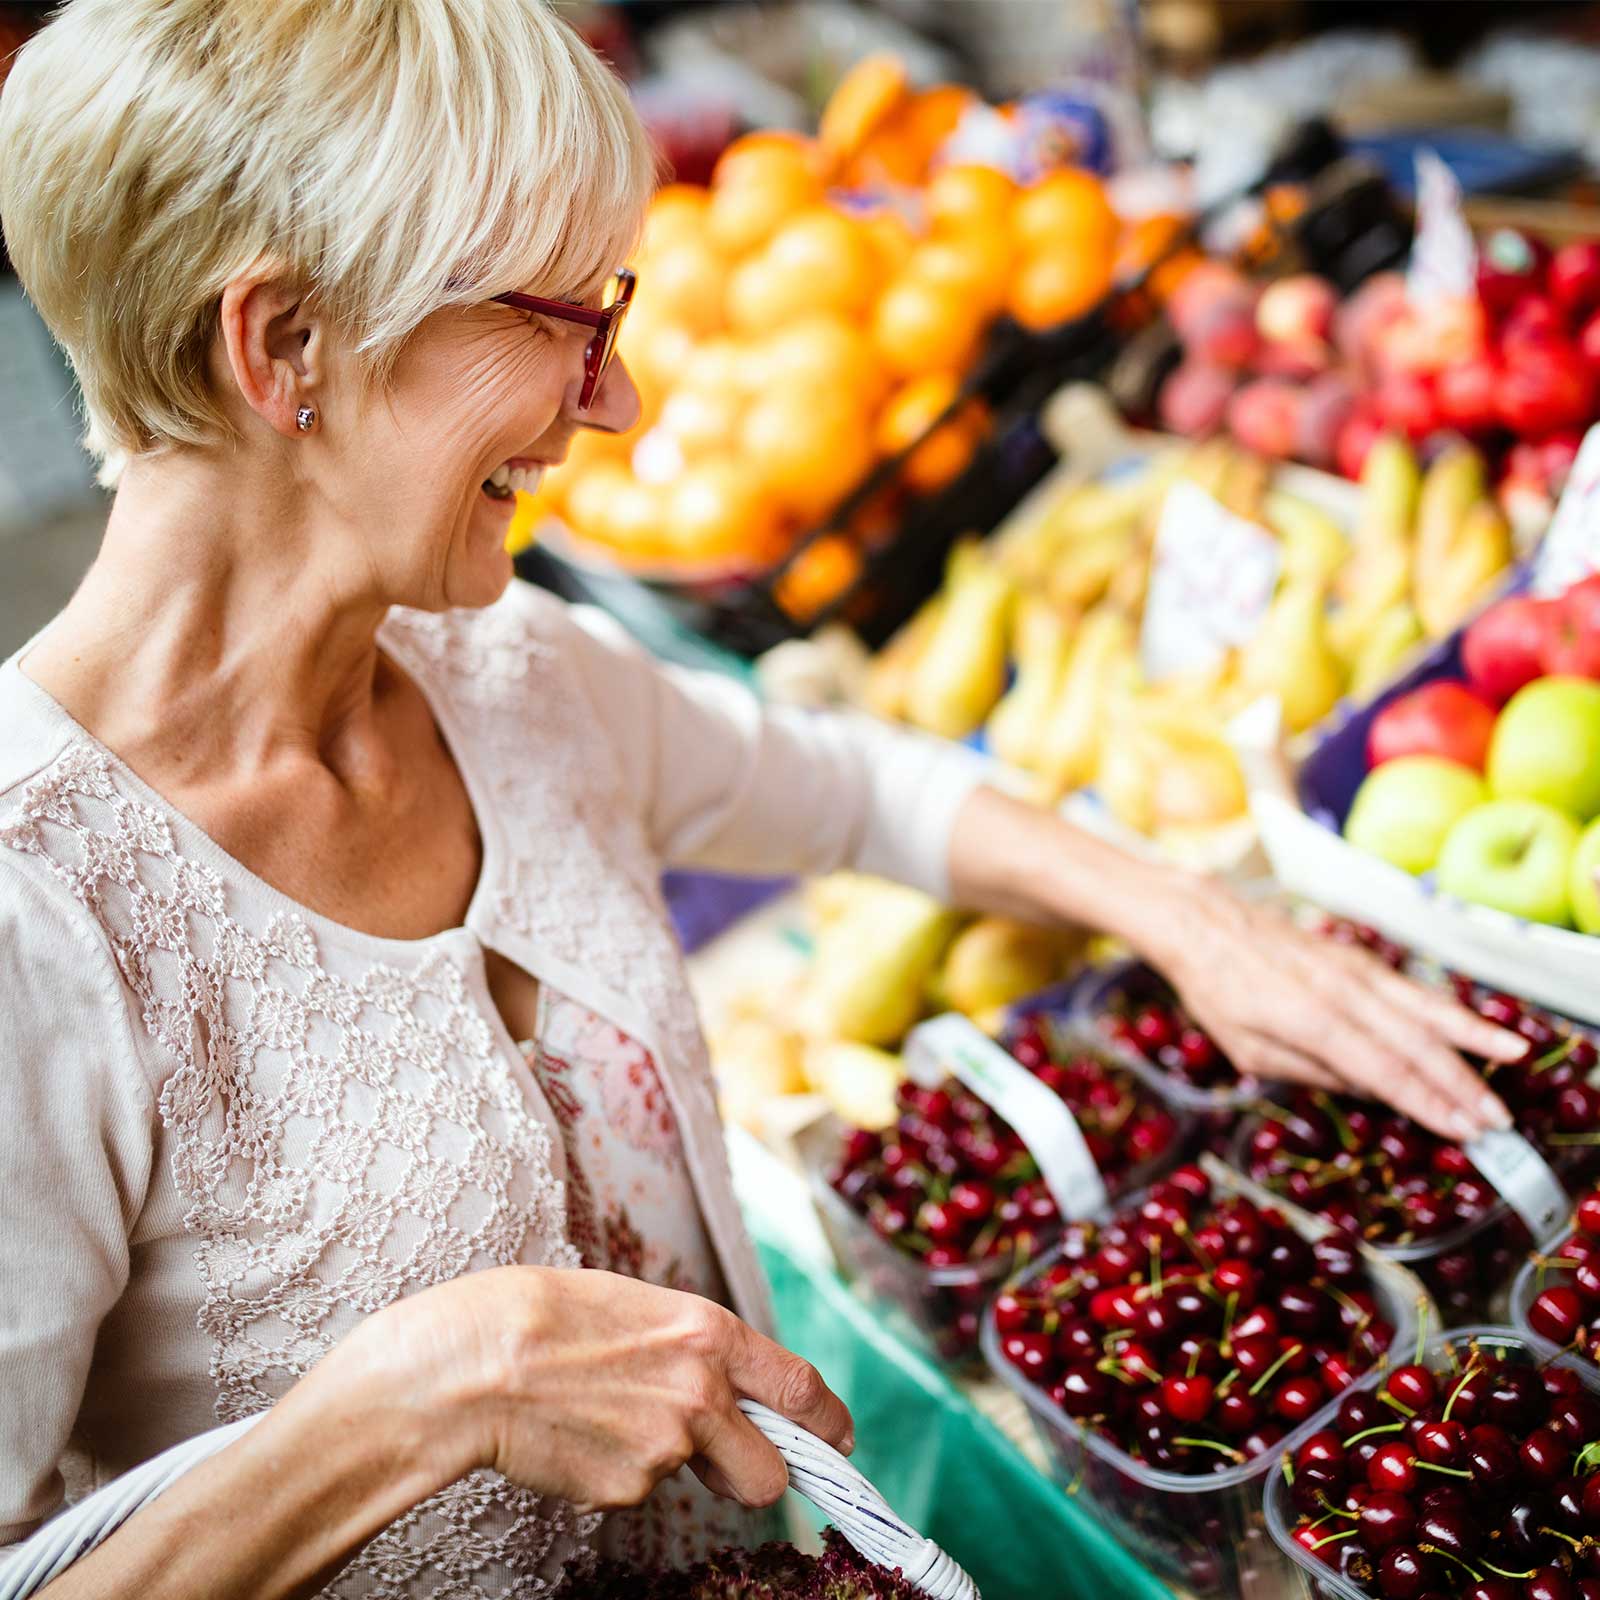 Older woman shops for fresh fruit in grocery store.